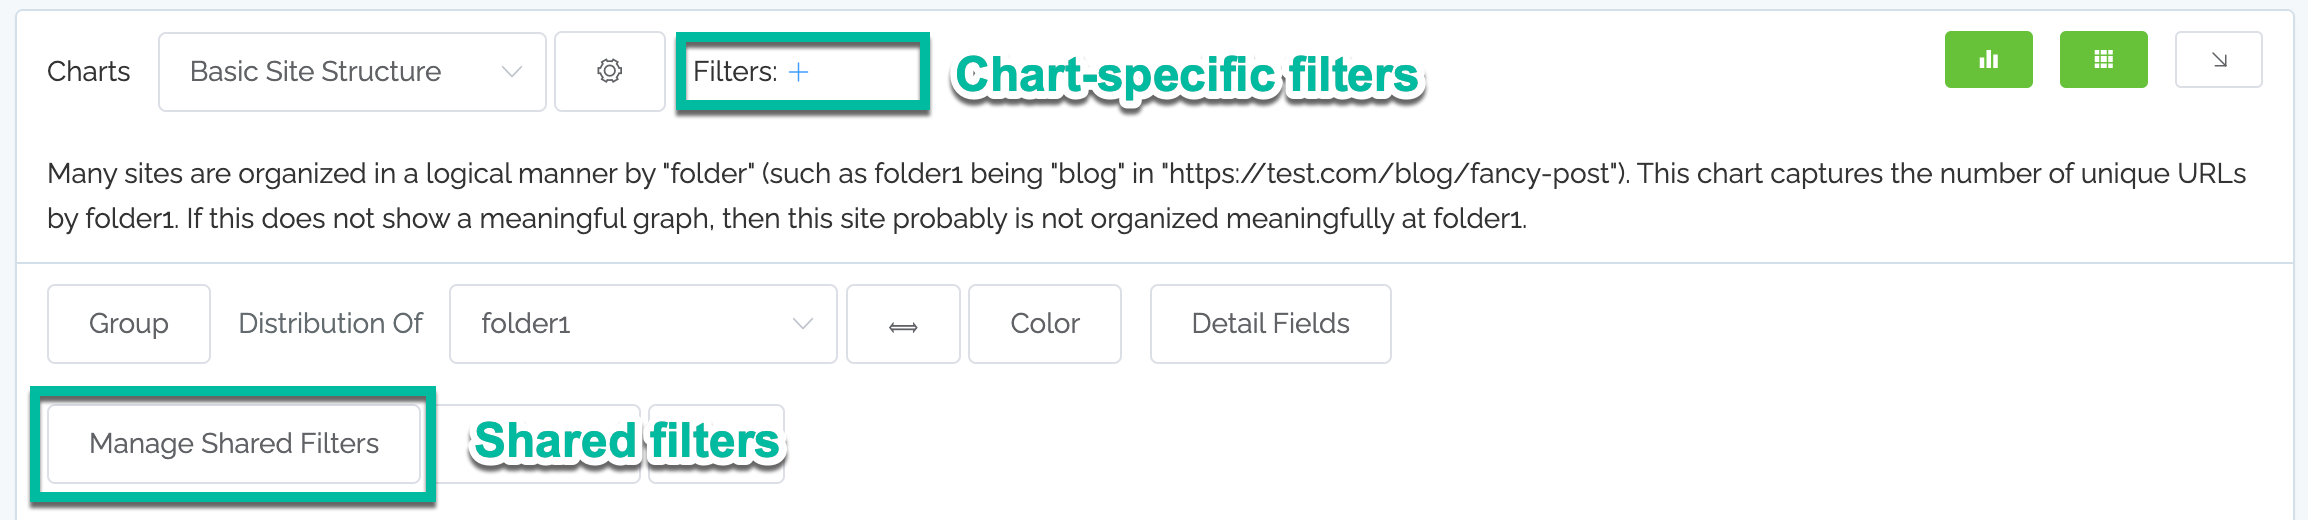 ../_images/shared-vs-chart-specific-filters.png